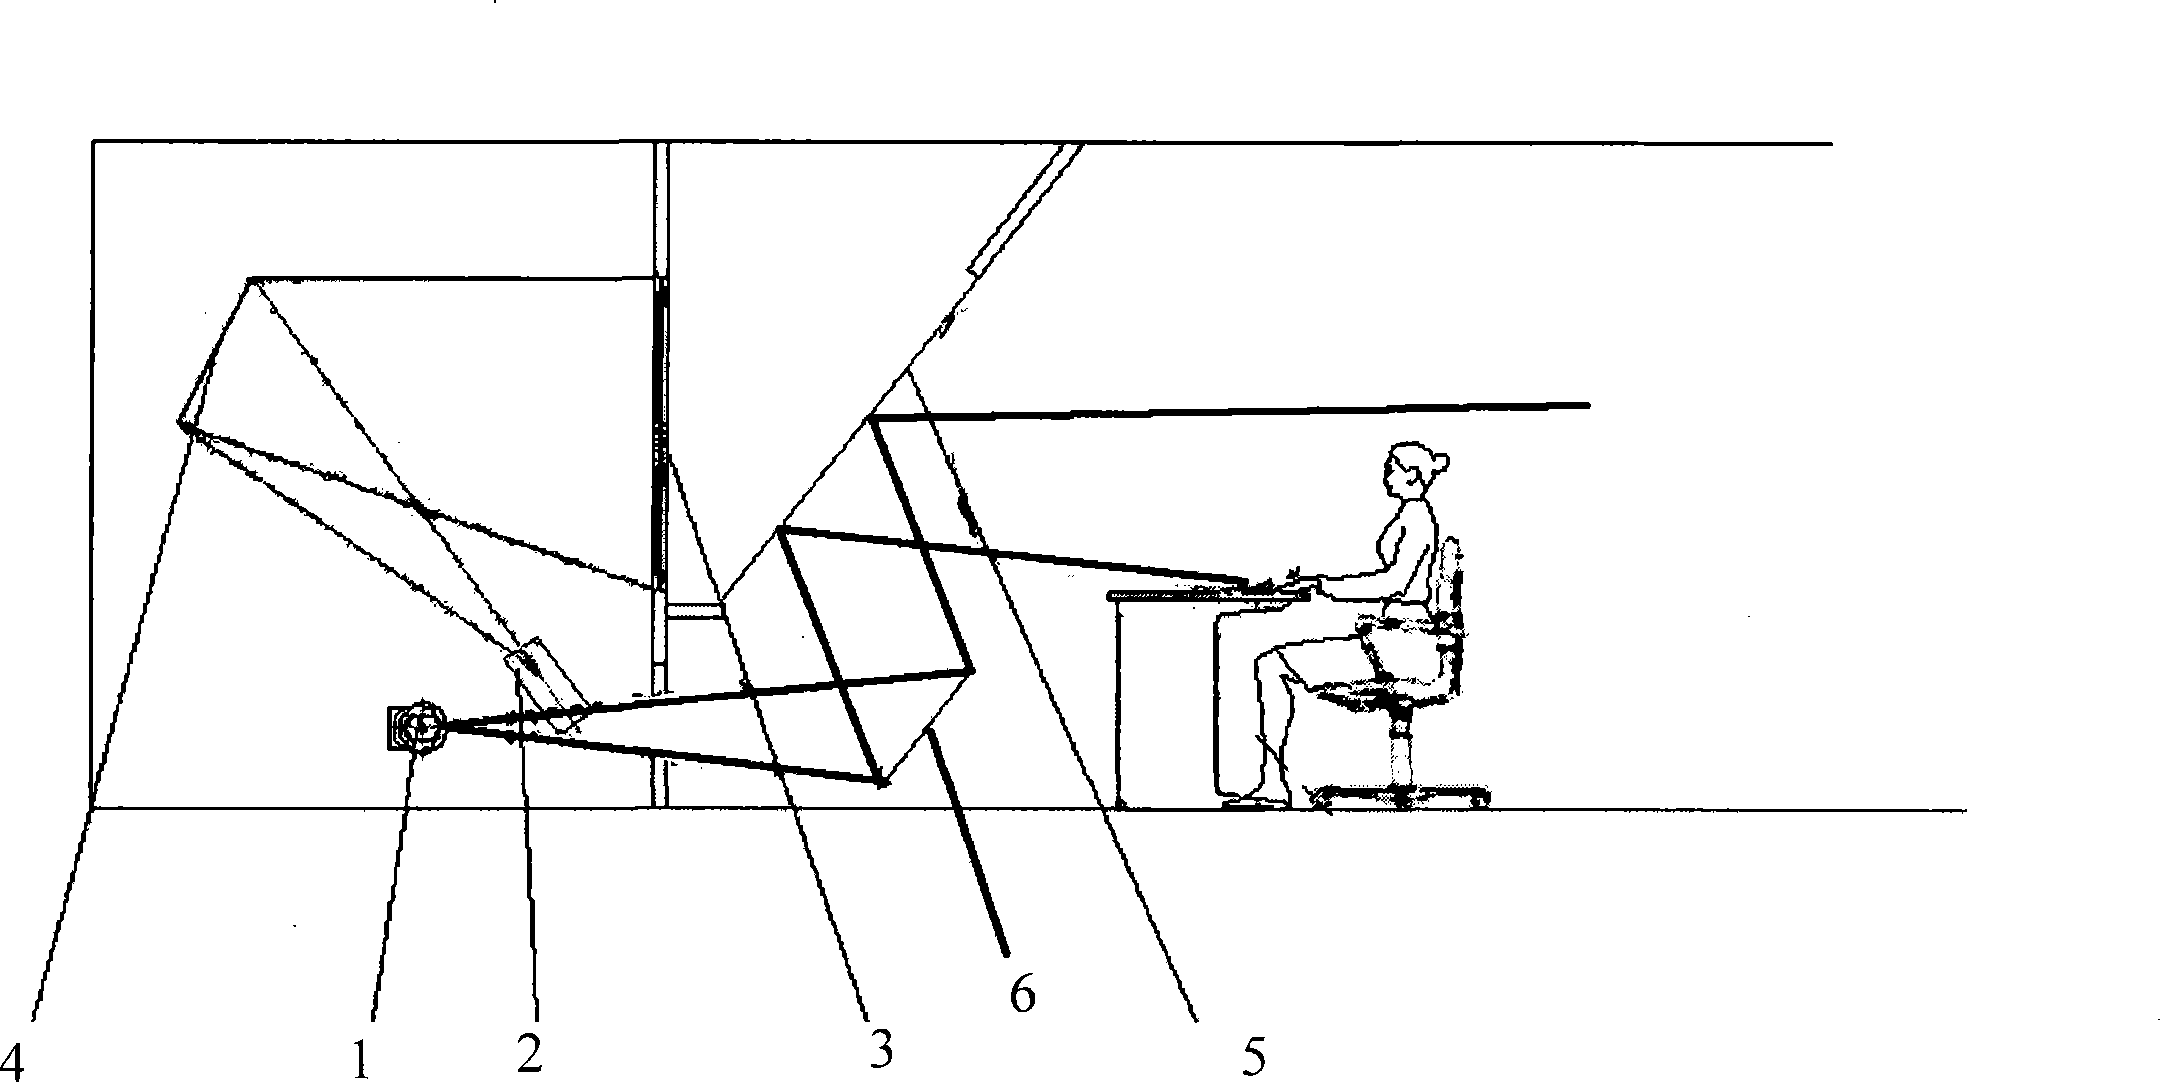 Imaging and projecting system for video conference